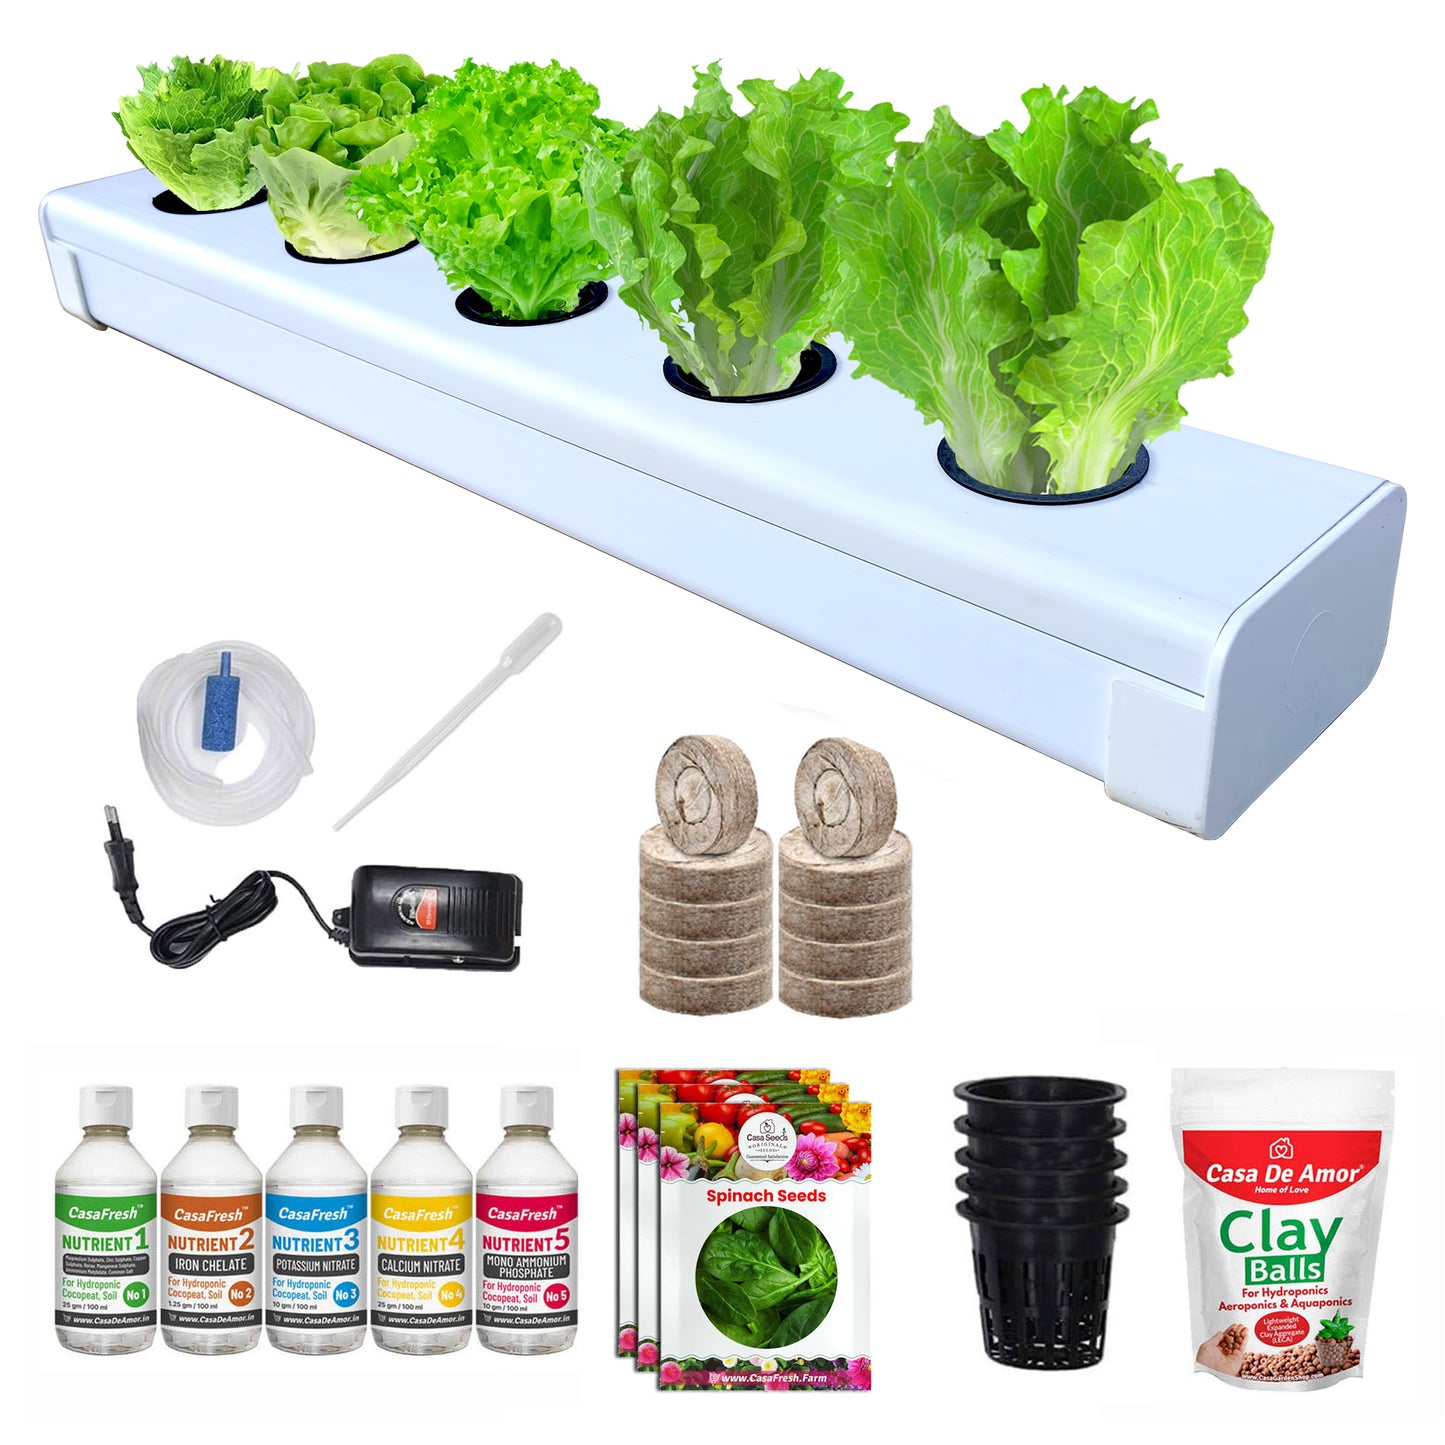 Casa De Amor Hydroponics Deep Water Culture (DWC) Kit for 5 Plants, Exotic Leafy & Herbs, Perfect at Home Kit for Hydroponic Indoor and Outdoor Gardening